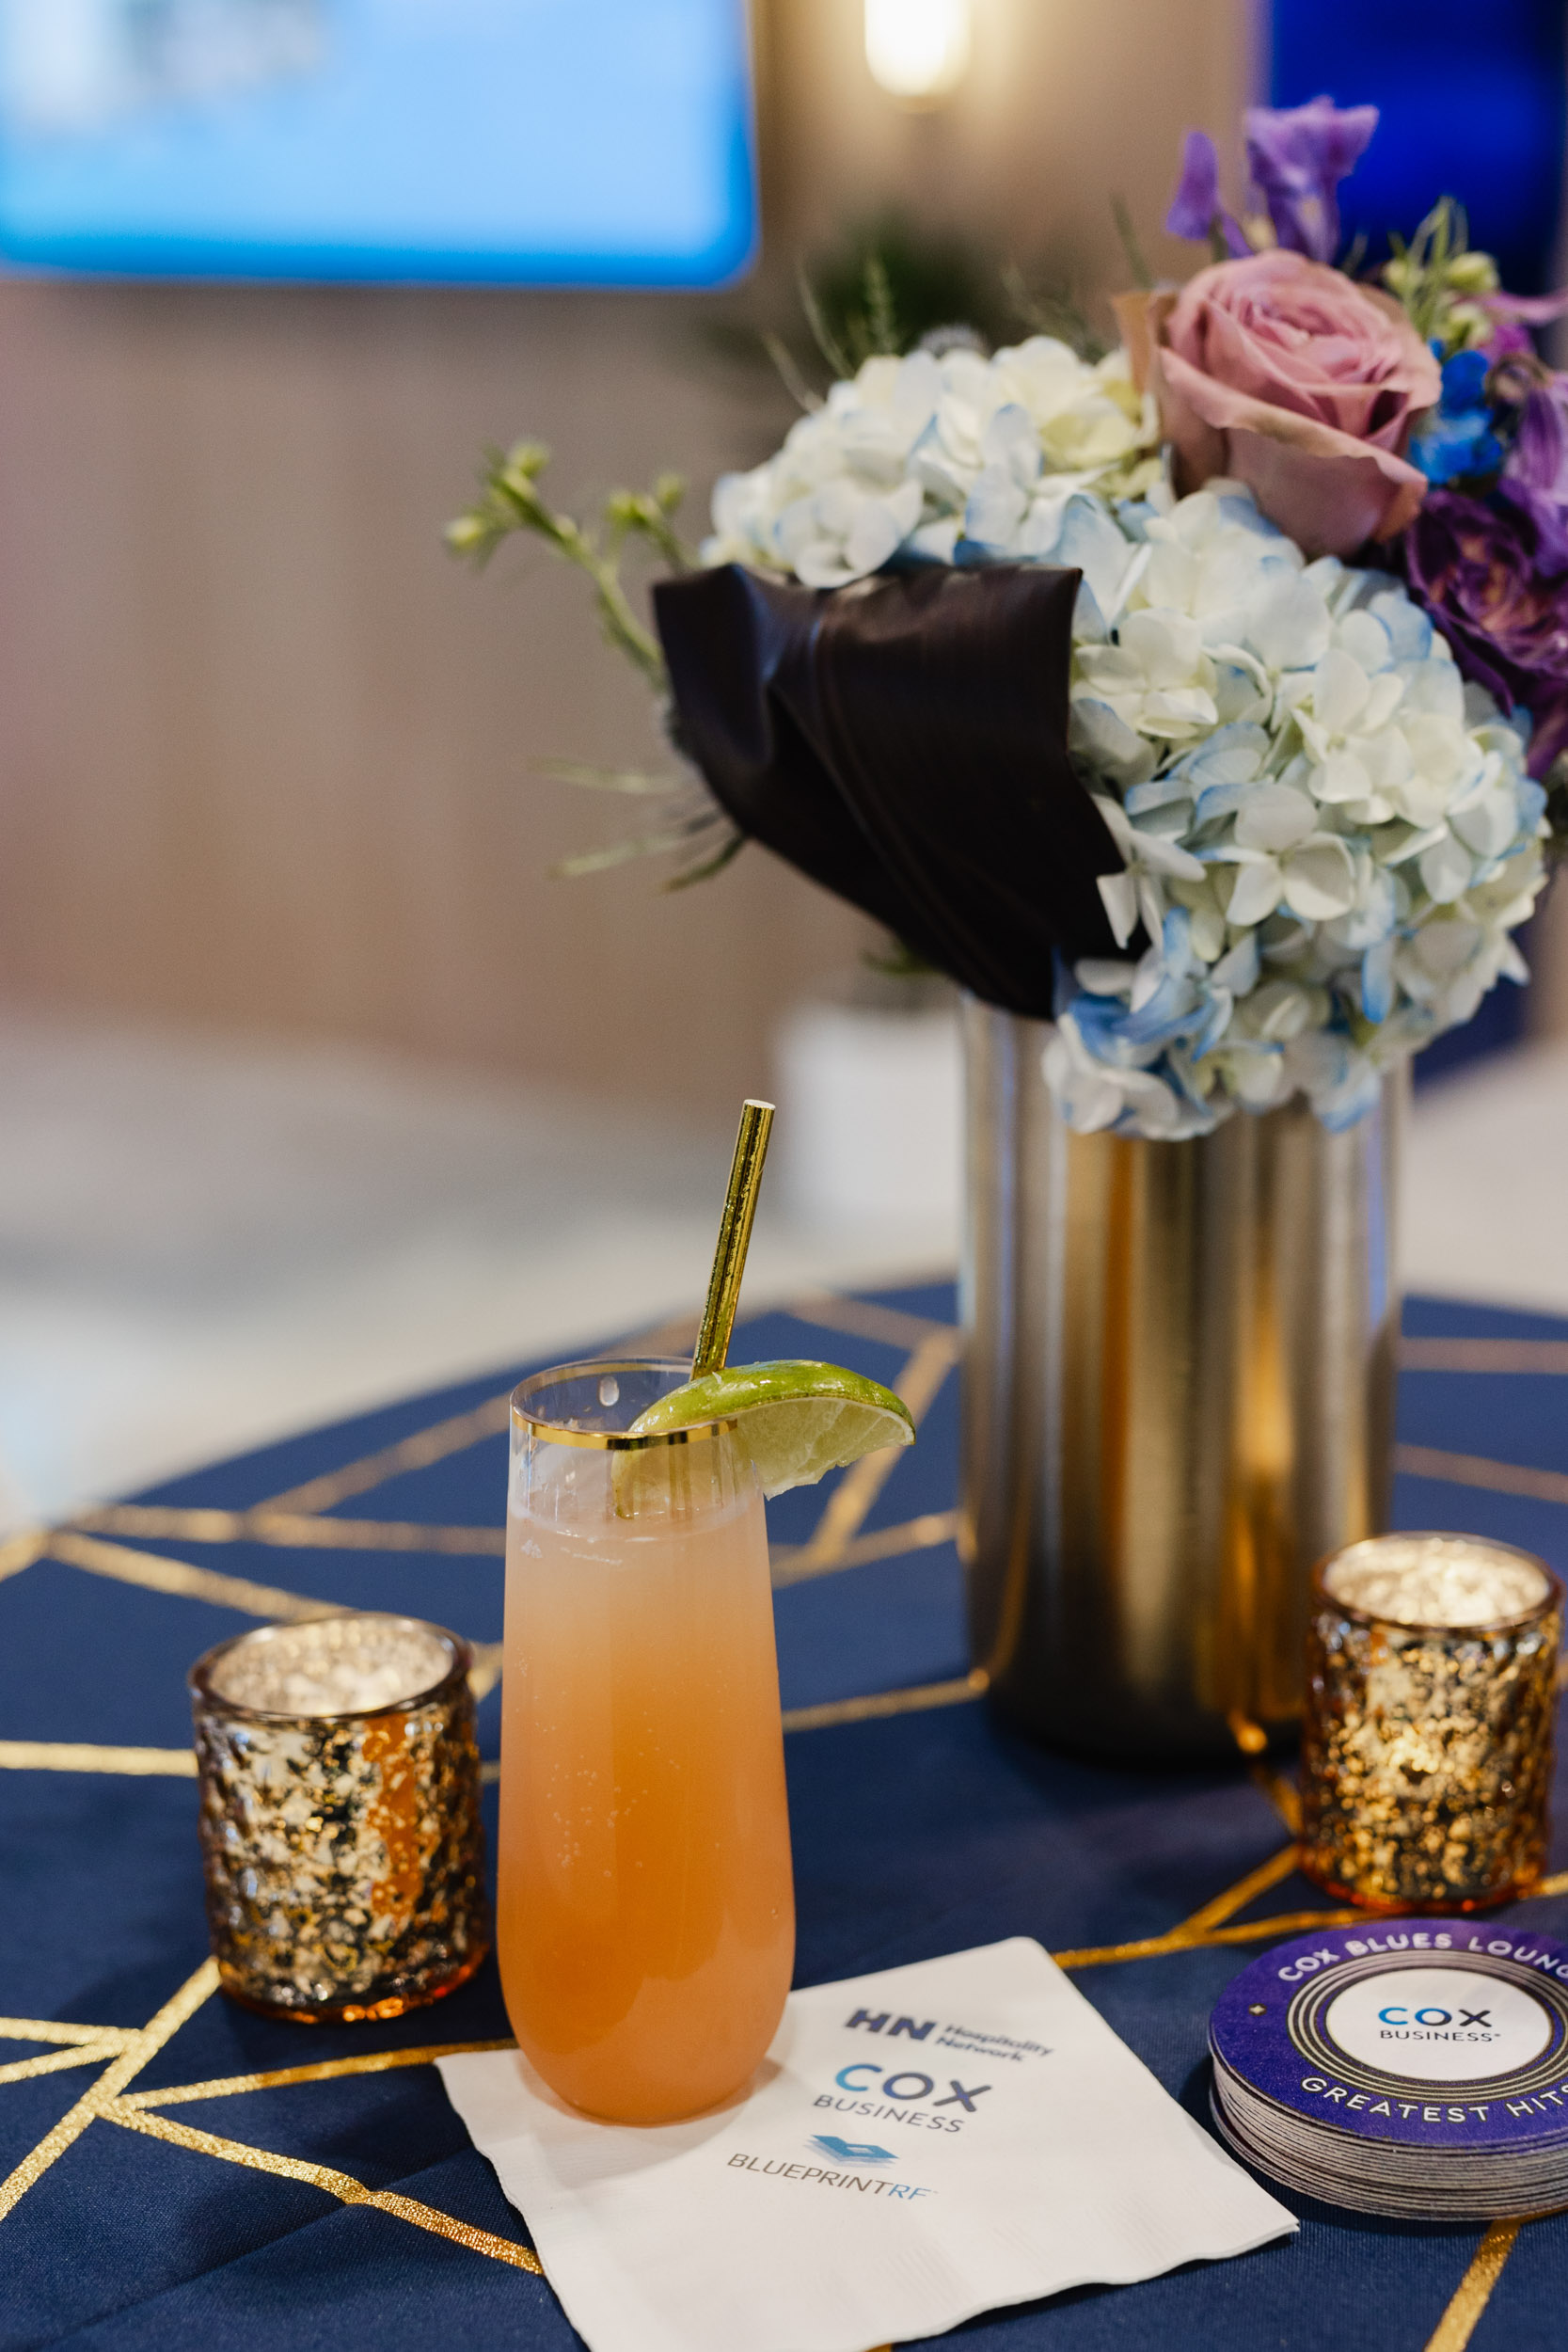 Toronto Trade show photography: A cocktail is sitting on a table in the midst of flowers.